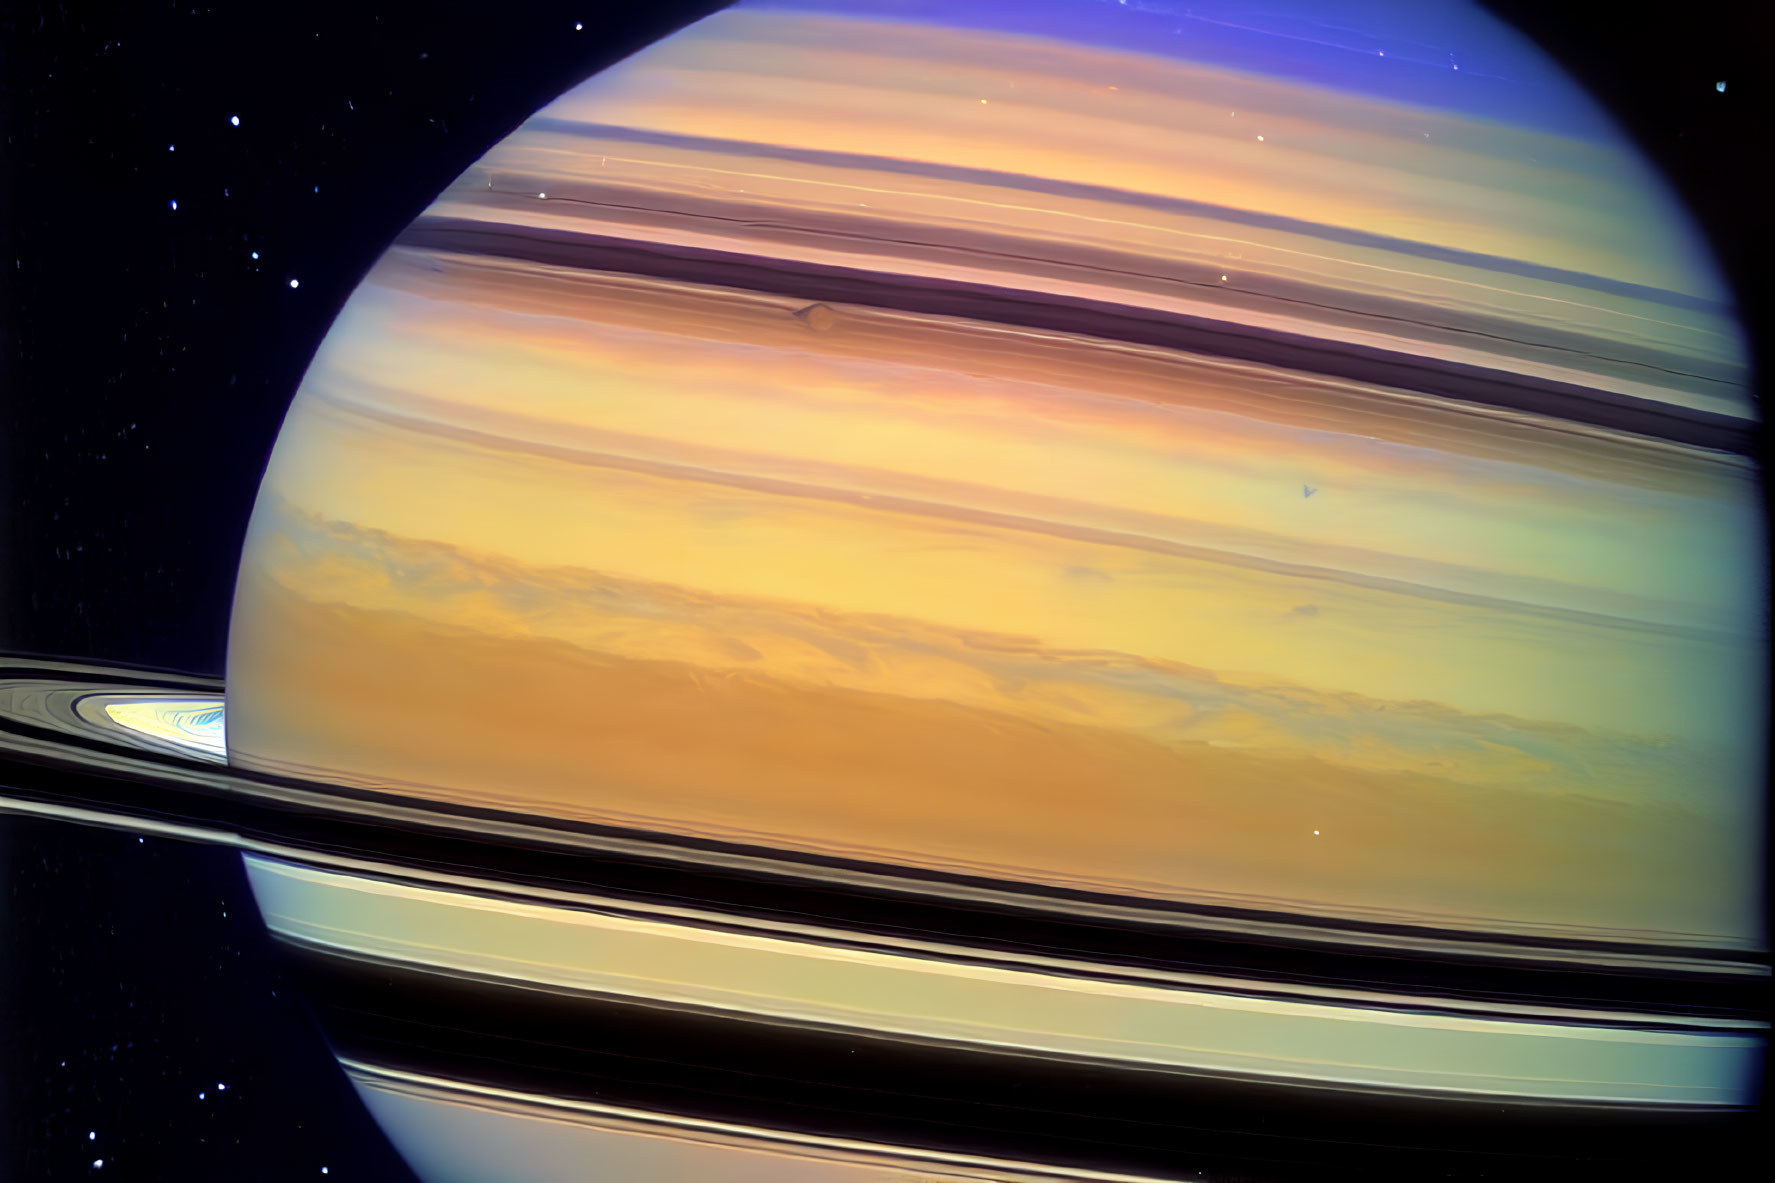 Saturn's Rings and Band-Patterned Atmosphere in Yellow, Orange, and Brown